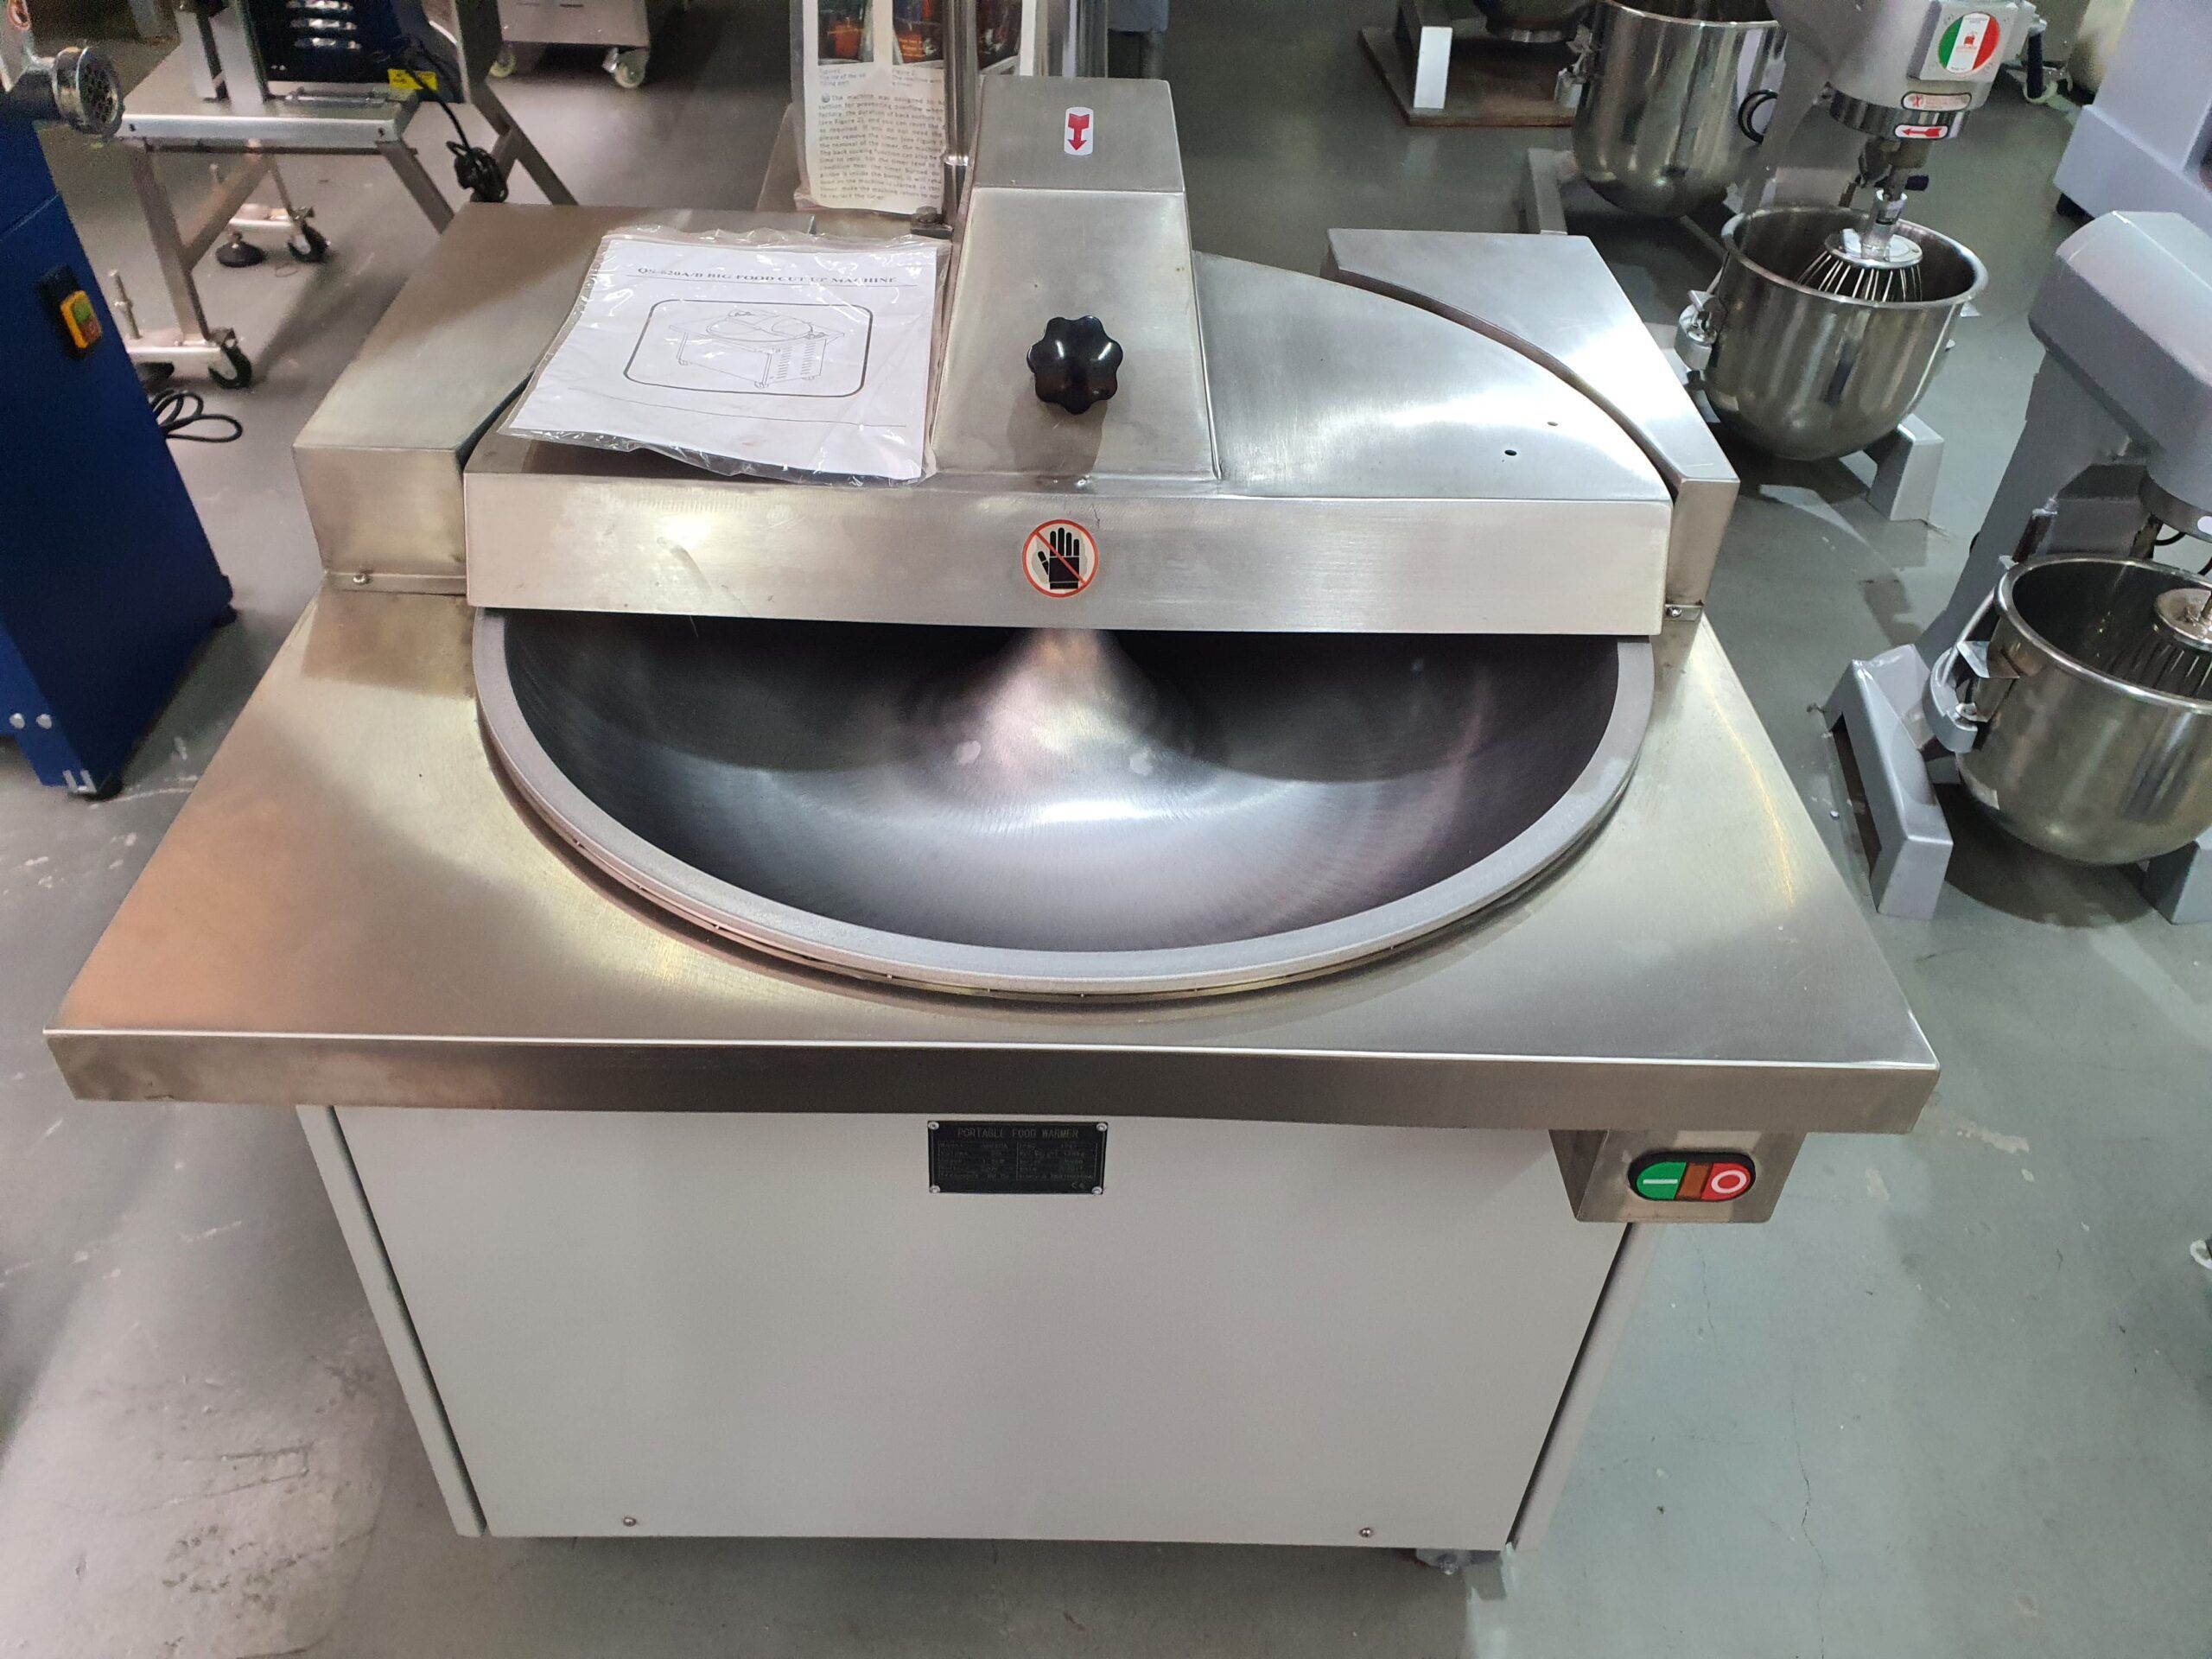 20l bowl cutter front image in store